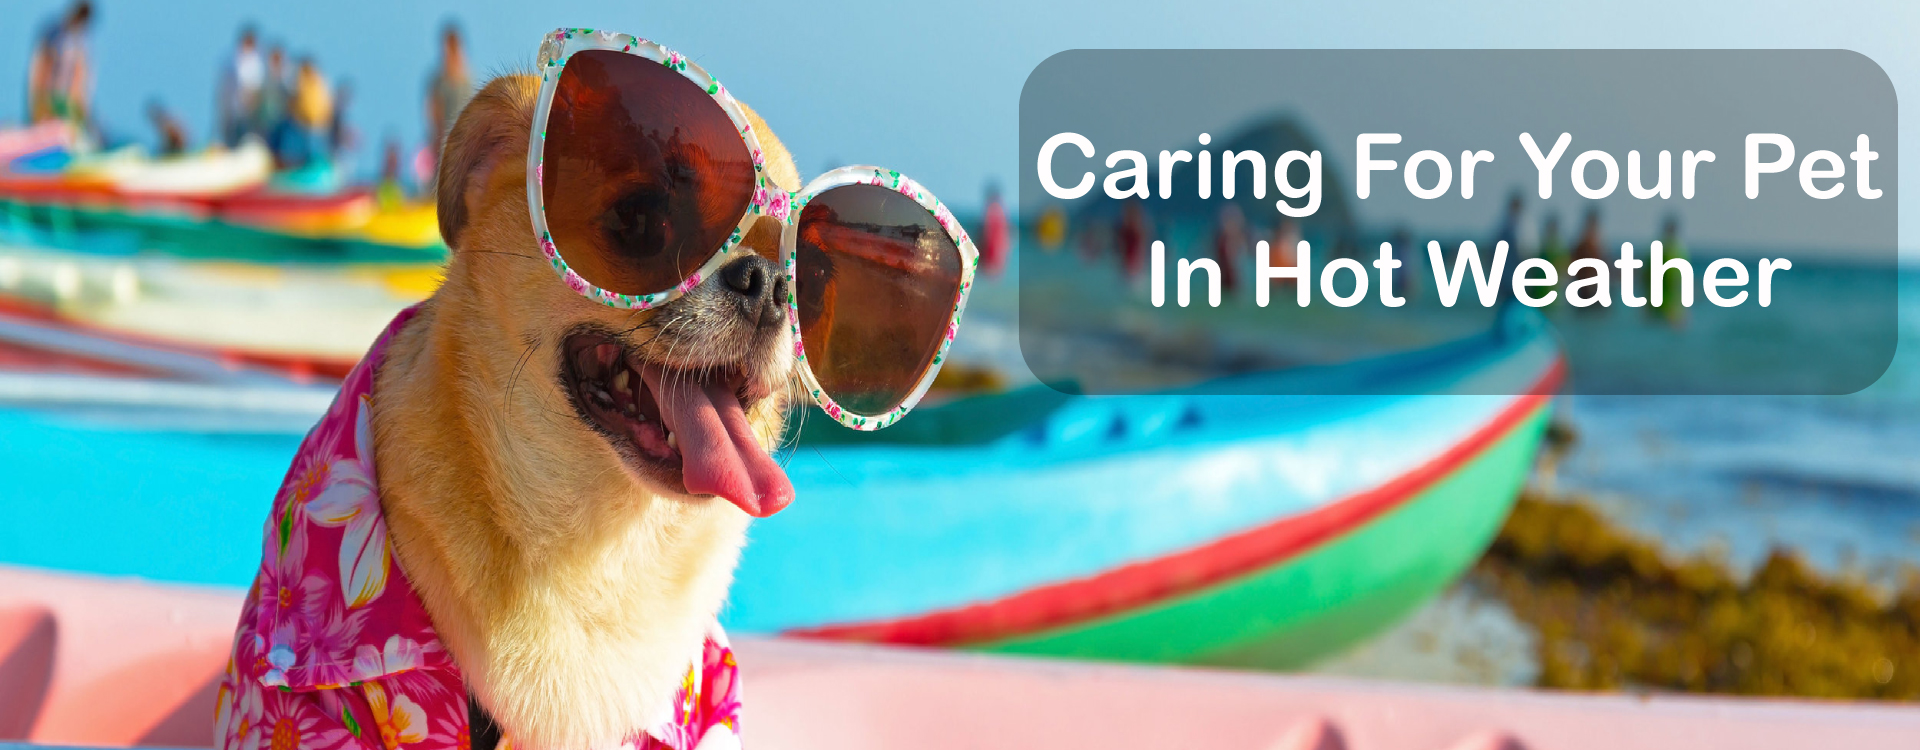 Caring-For-Your-Pet-In-Hot-Weather